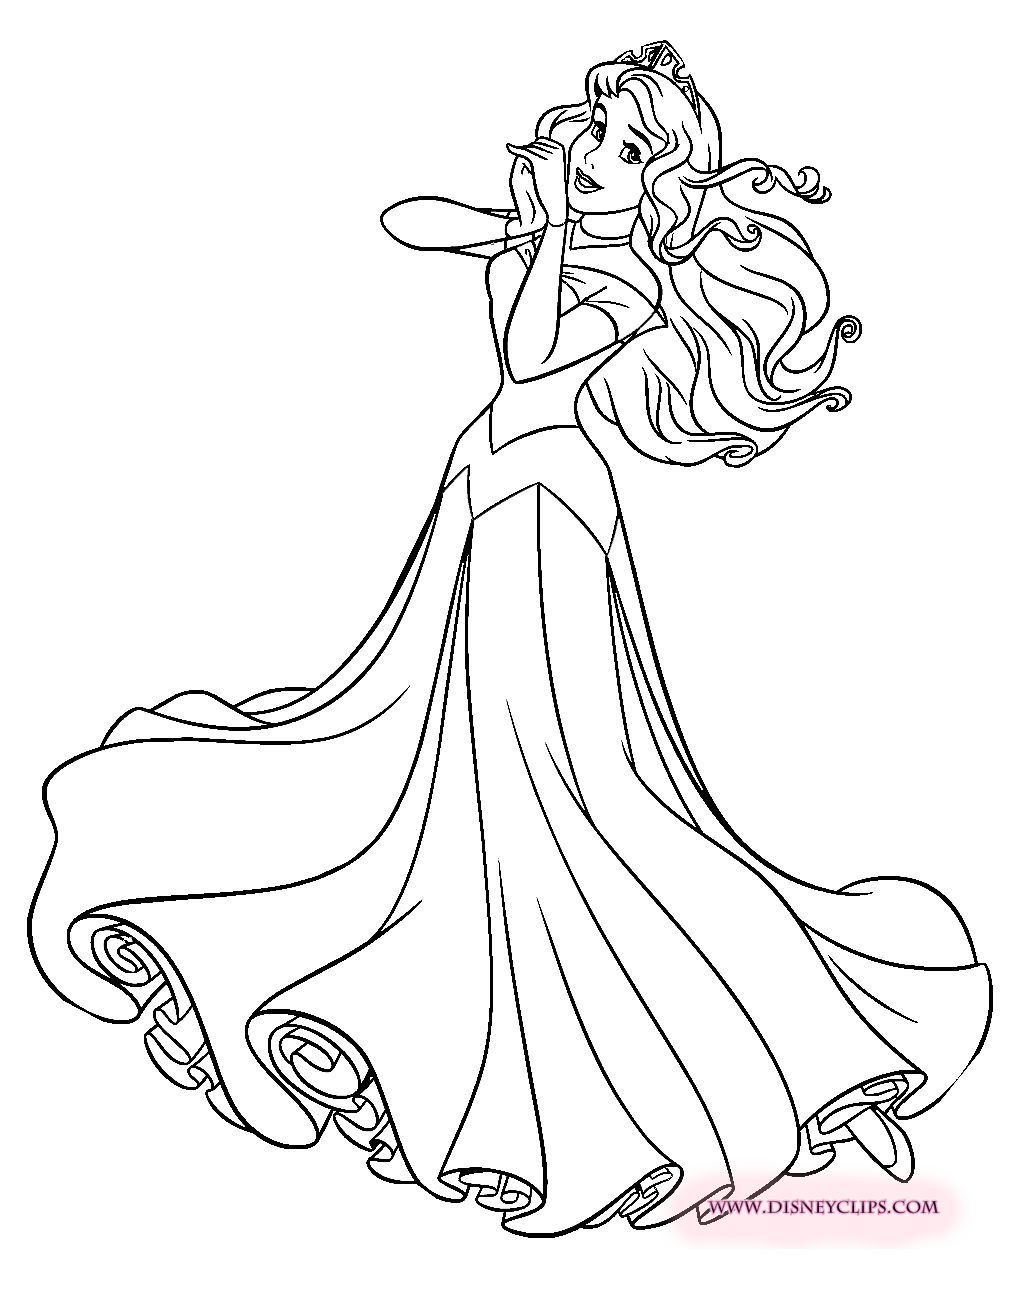 Princess Aurora coloring page   Sleeping beauty coloring pages ...